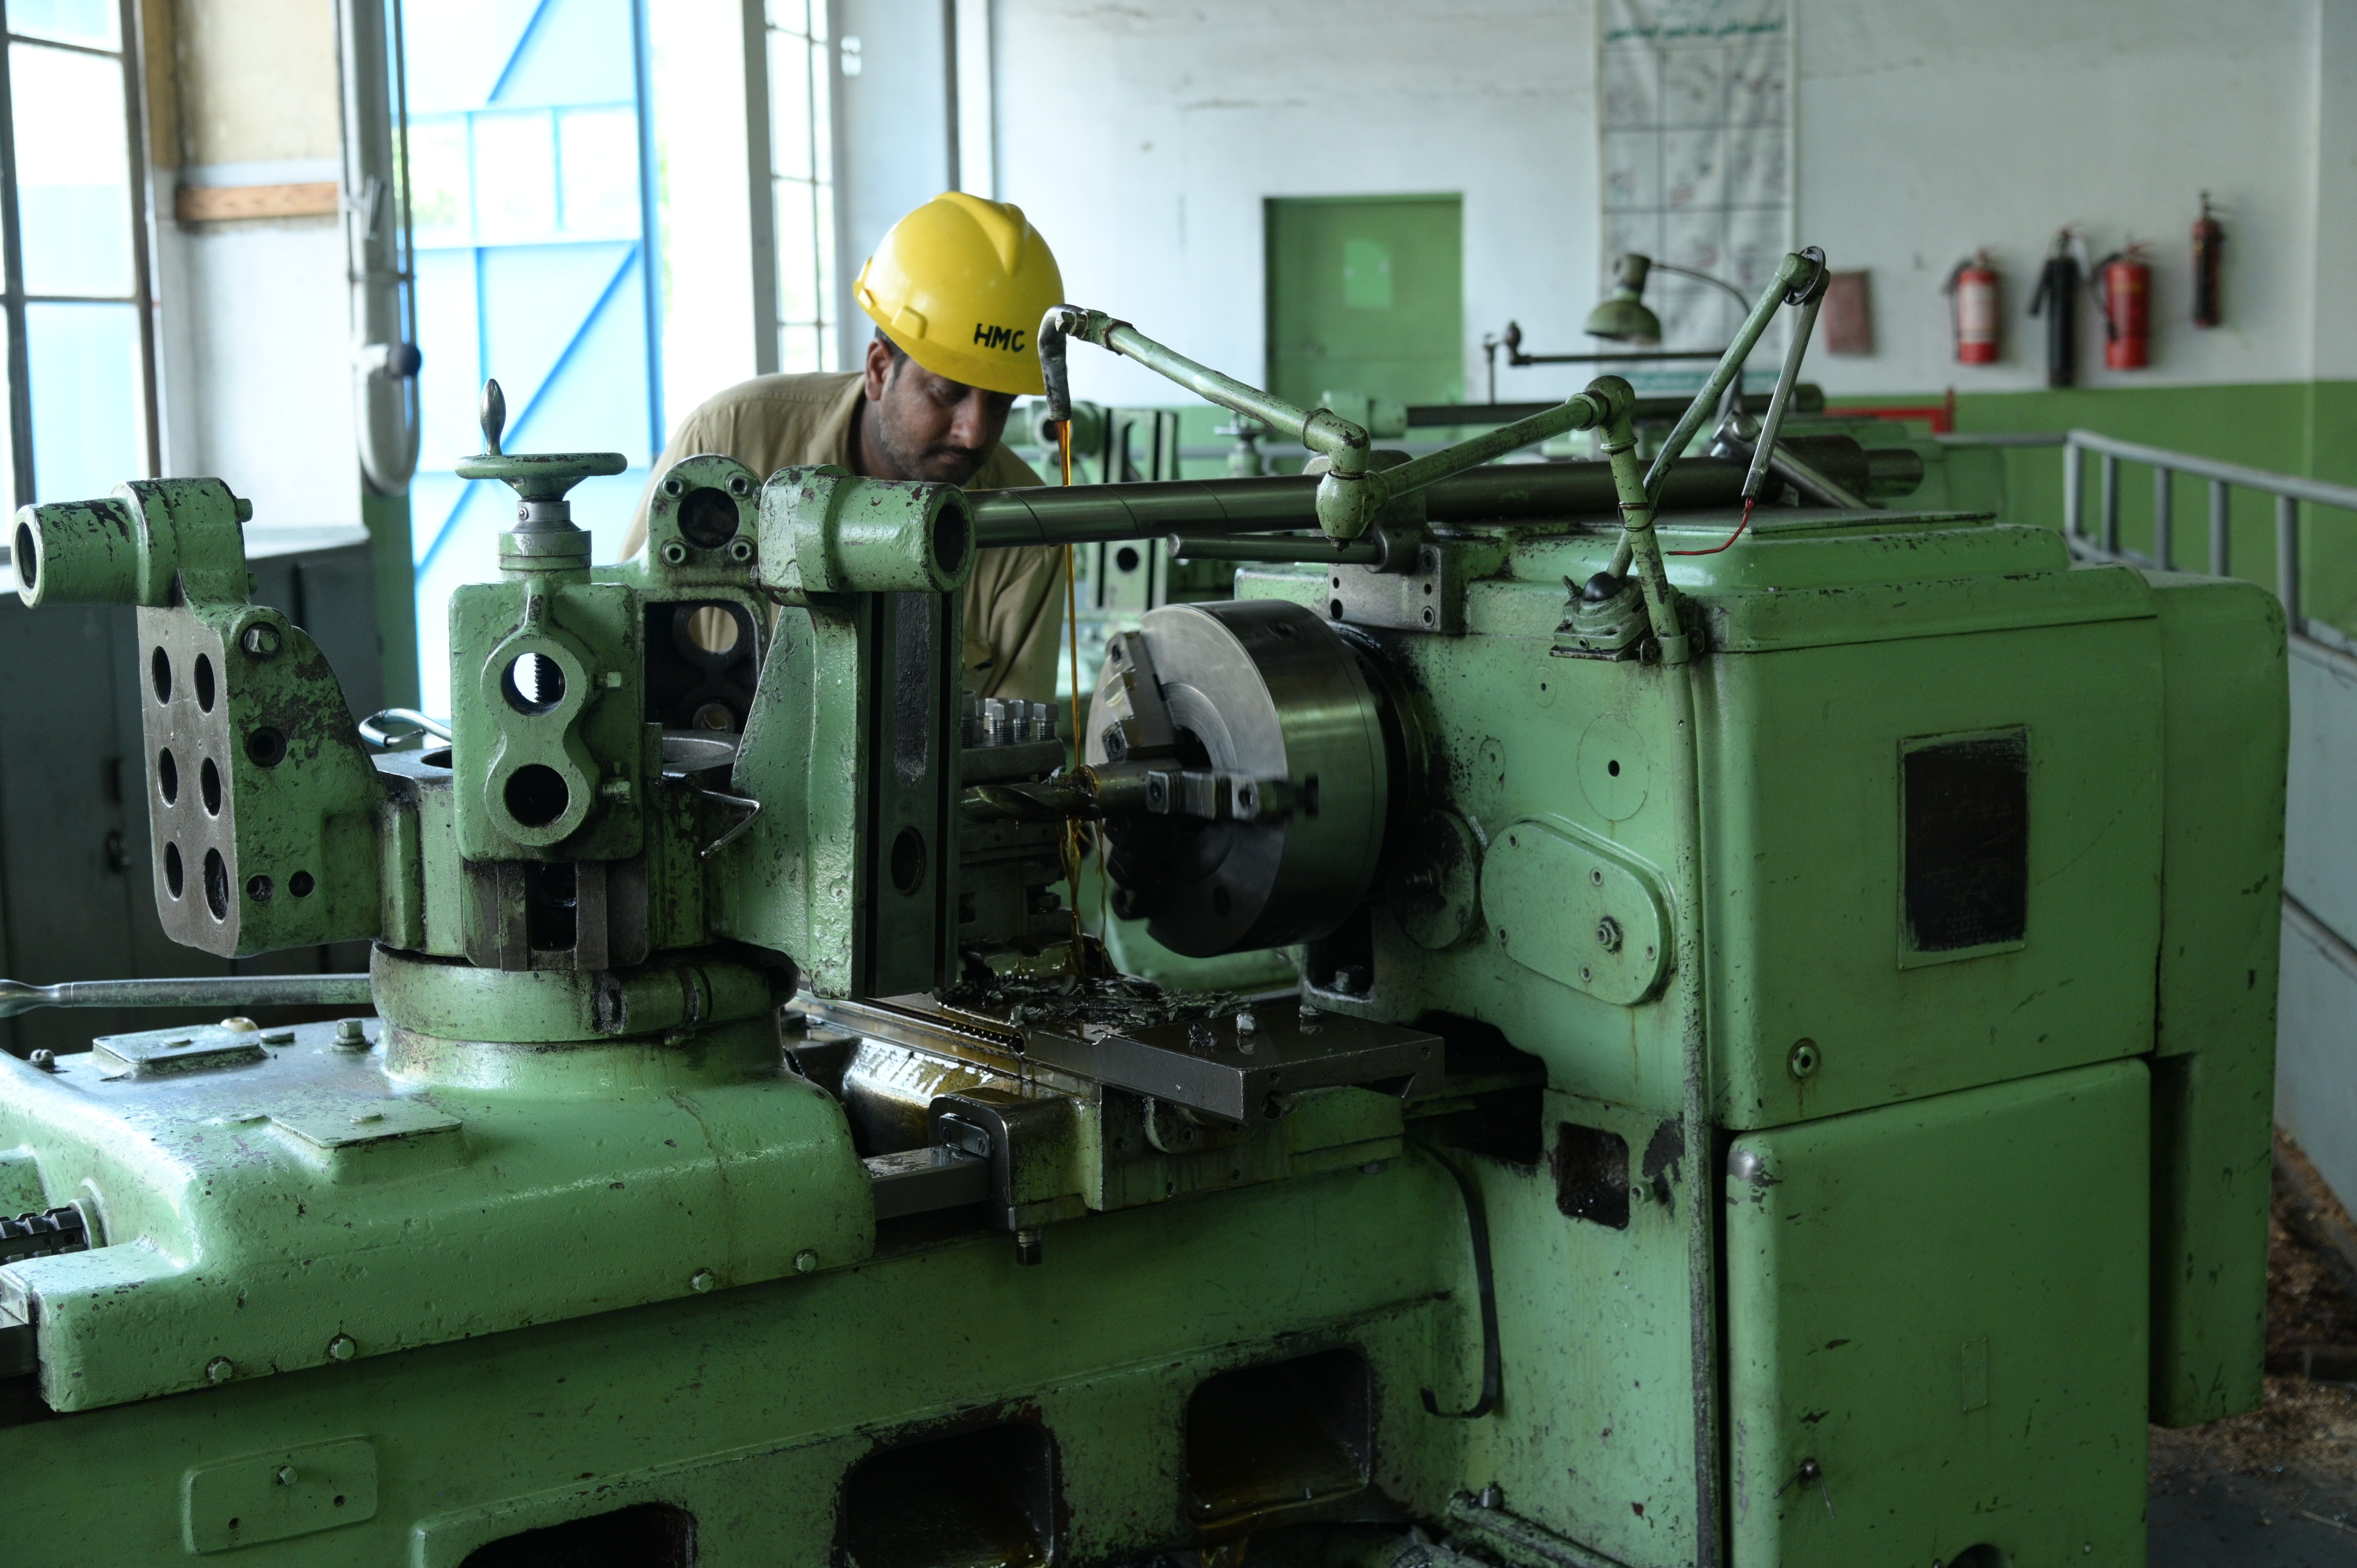 A worker lubricating the machine by using oil